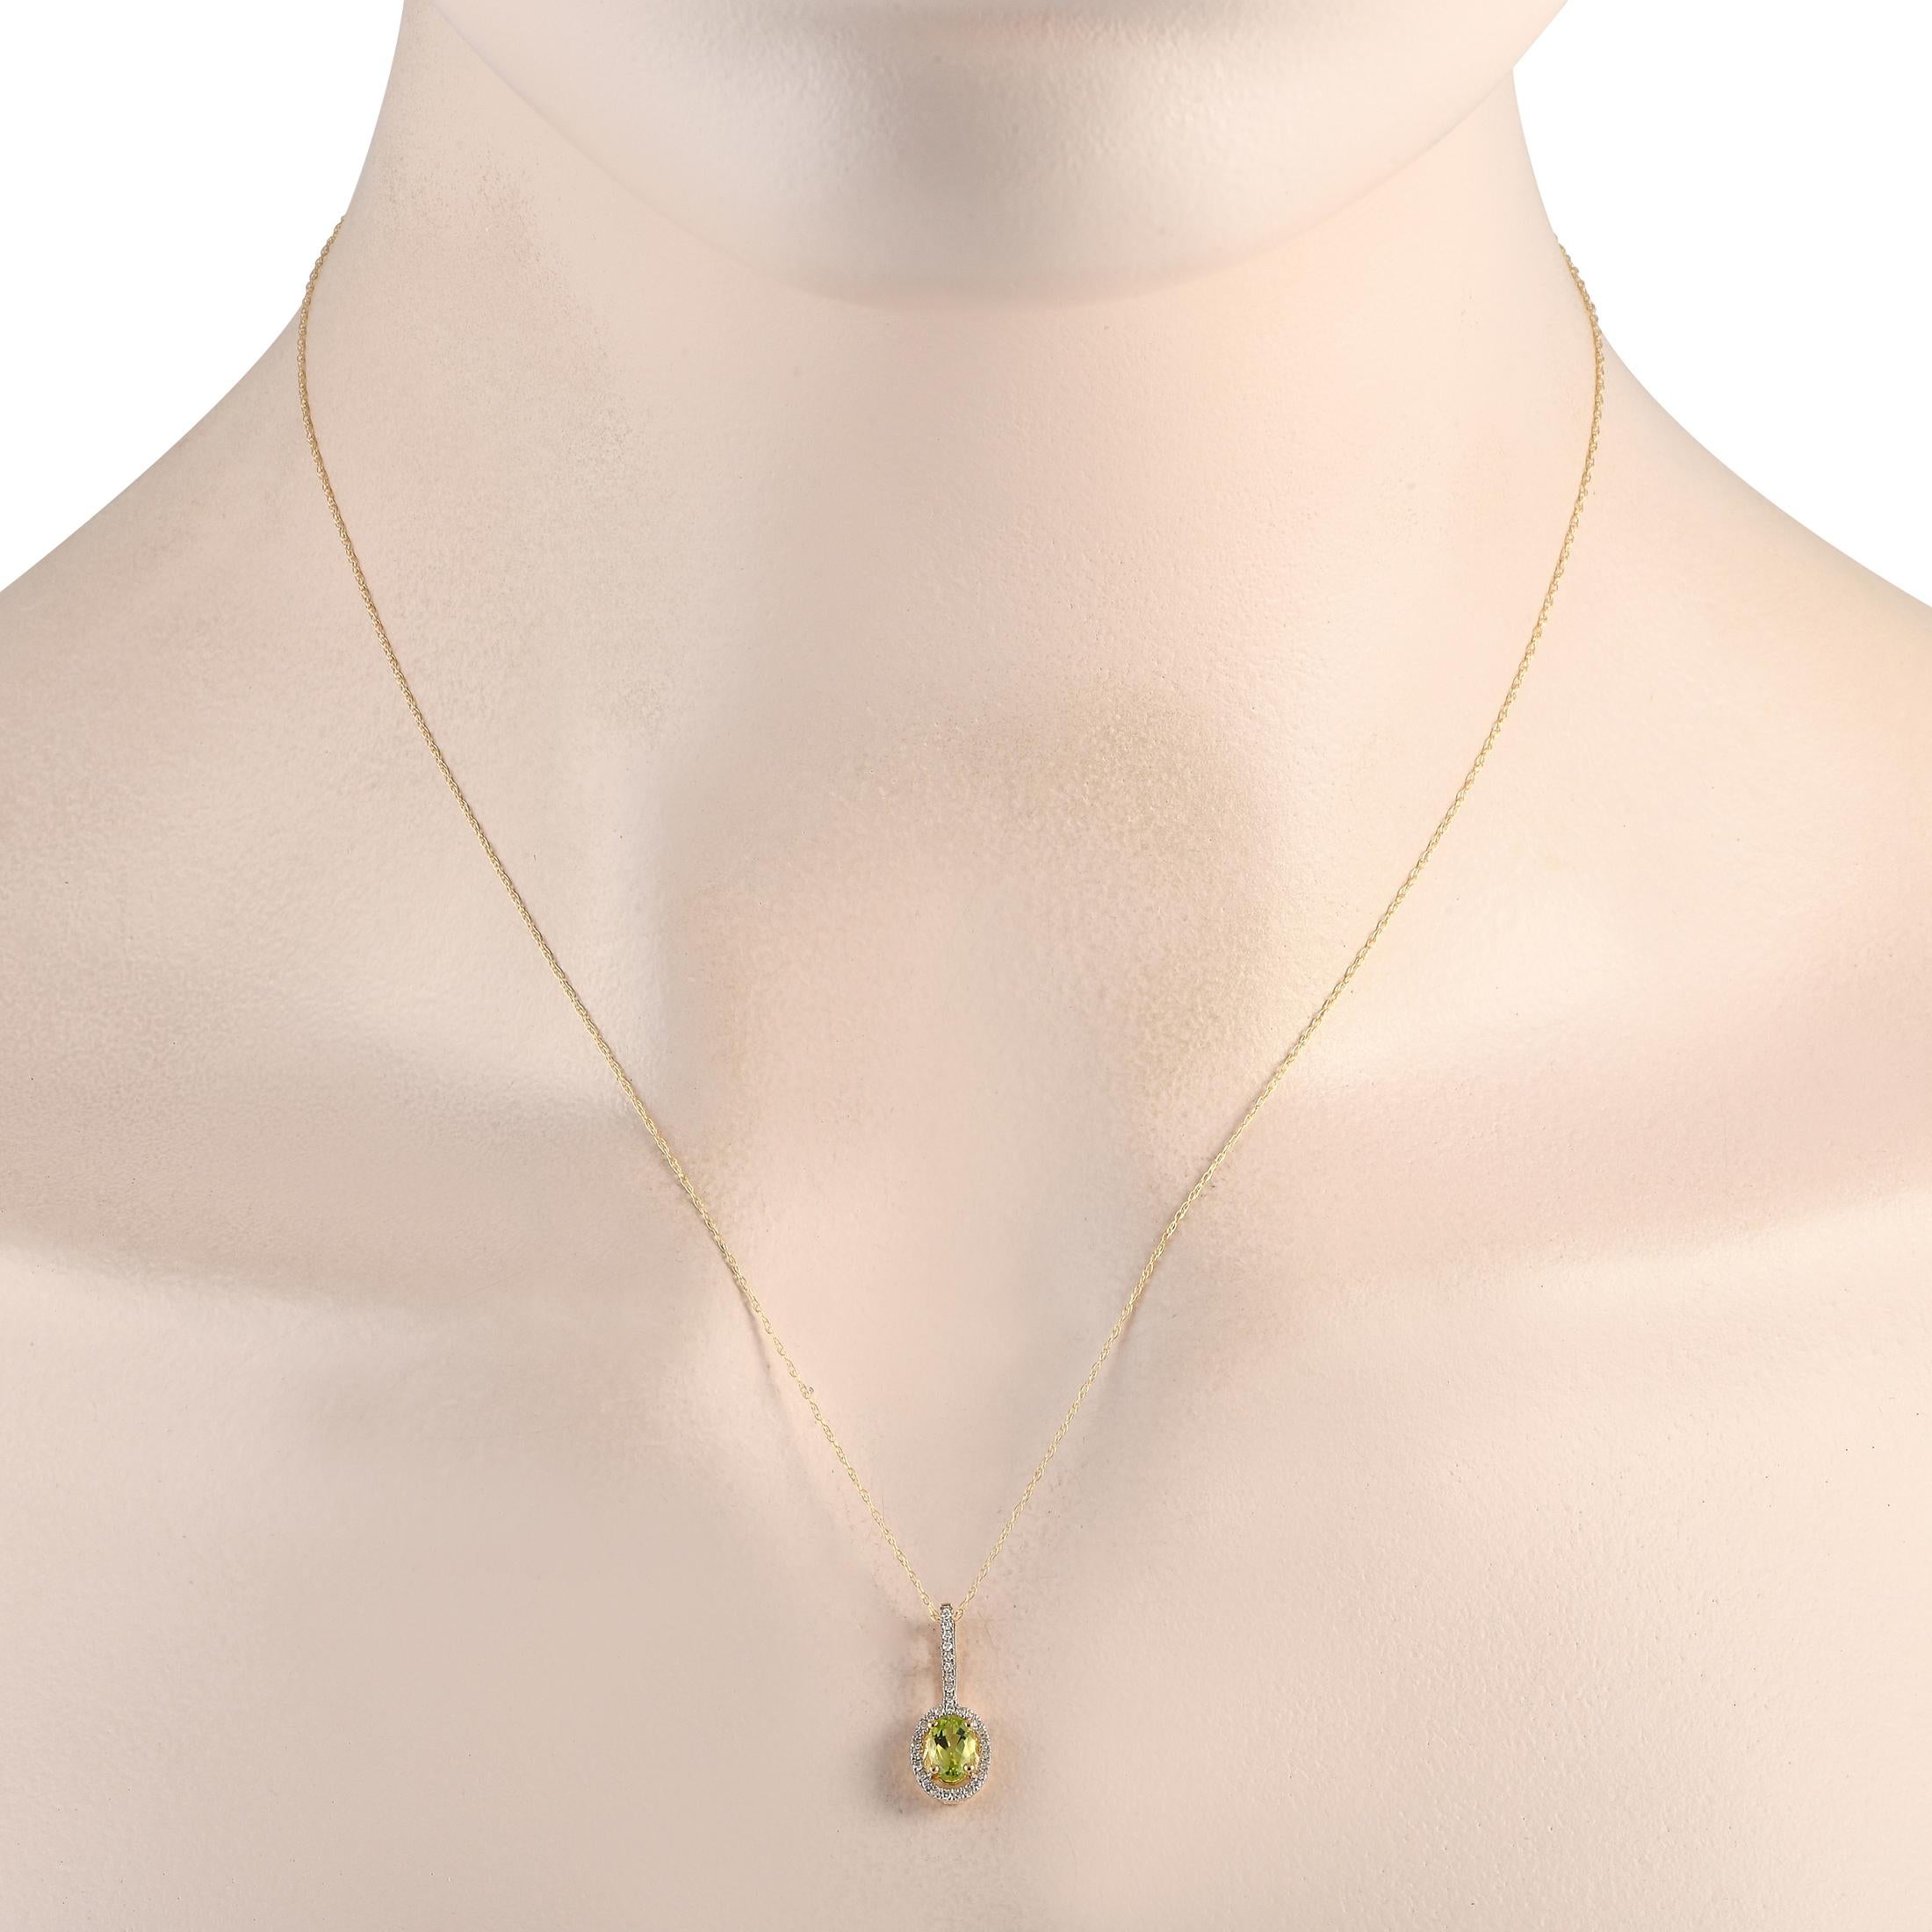 A stunning oval-cut Peridot gemstone and sparkling Diamond accents totaling 0.09 carats come together beautifully on this necklaces simple, elegant pendant. Suspended from an 18 chain, the pendant measures 0.75 long by 0.25 wide and is crafted from